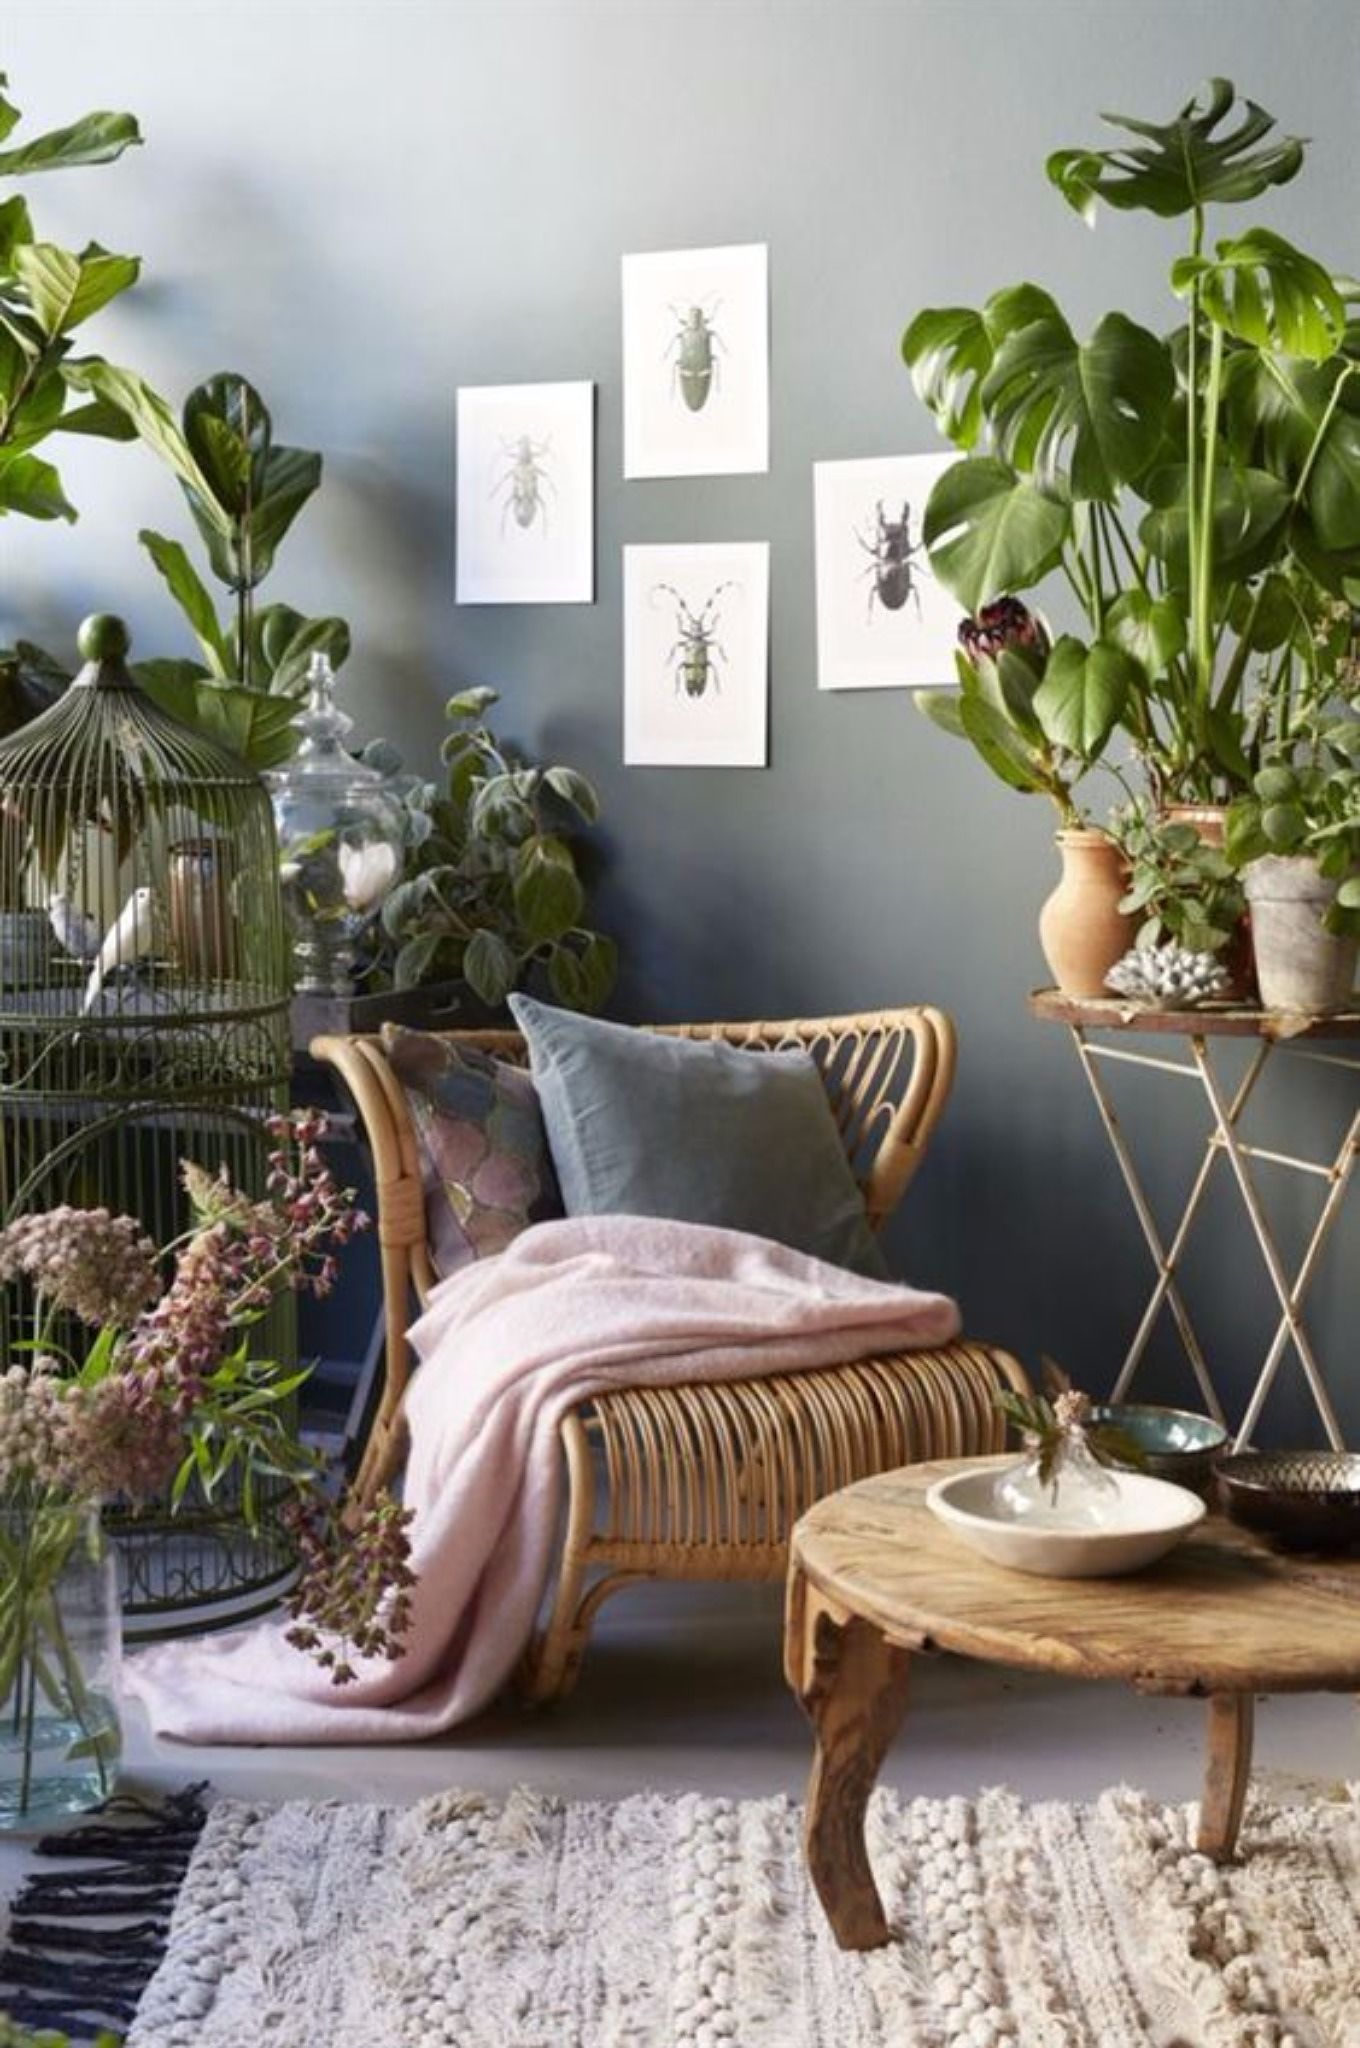 See Why Botanic Style Is The Ultimate Interior Design Hit